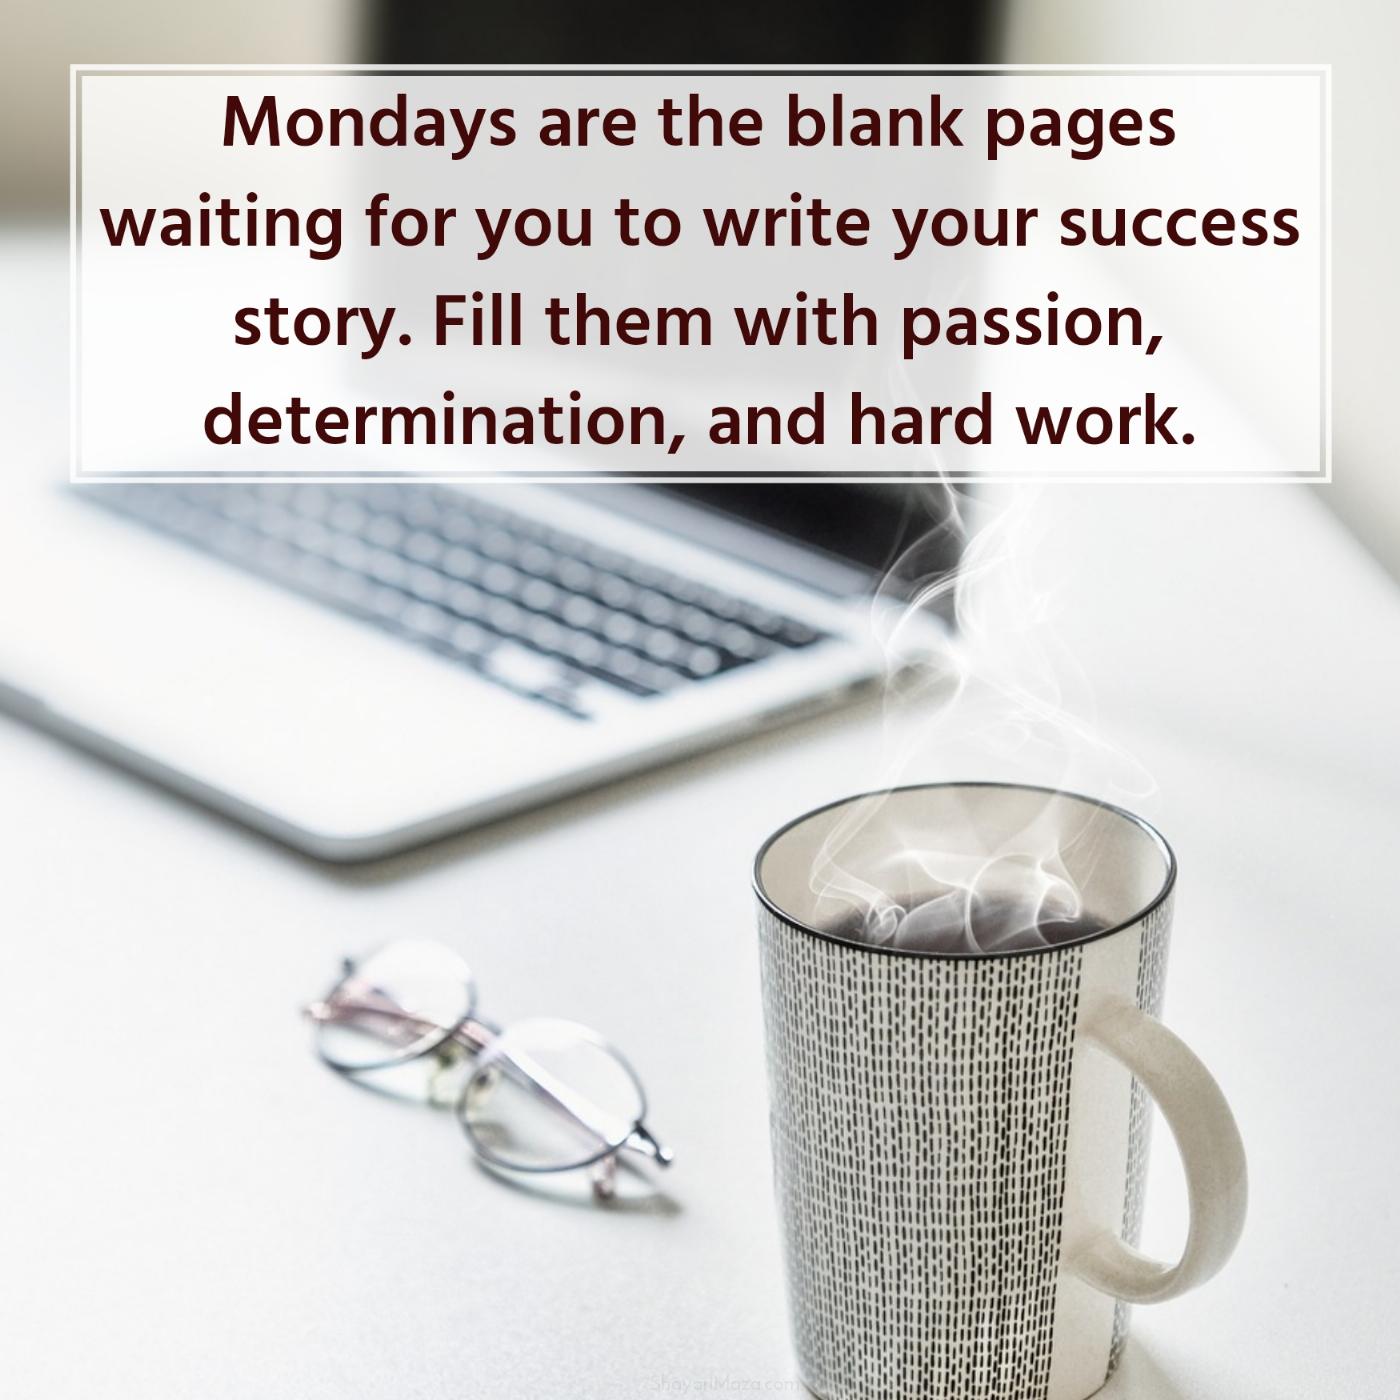 Mondays are the blank pages waiting for you to write